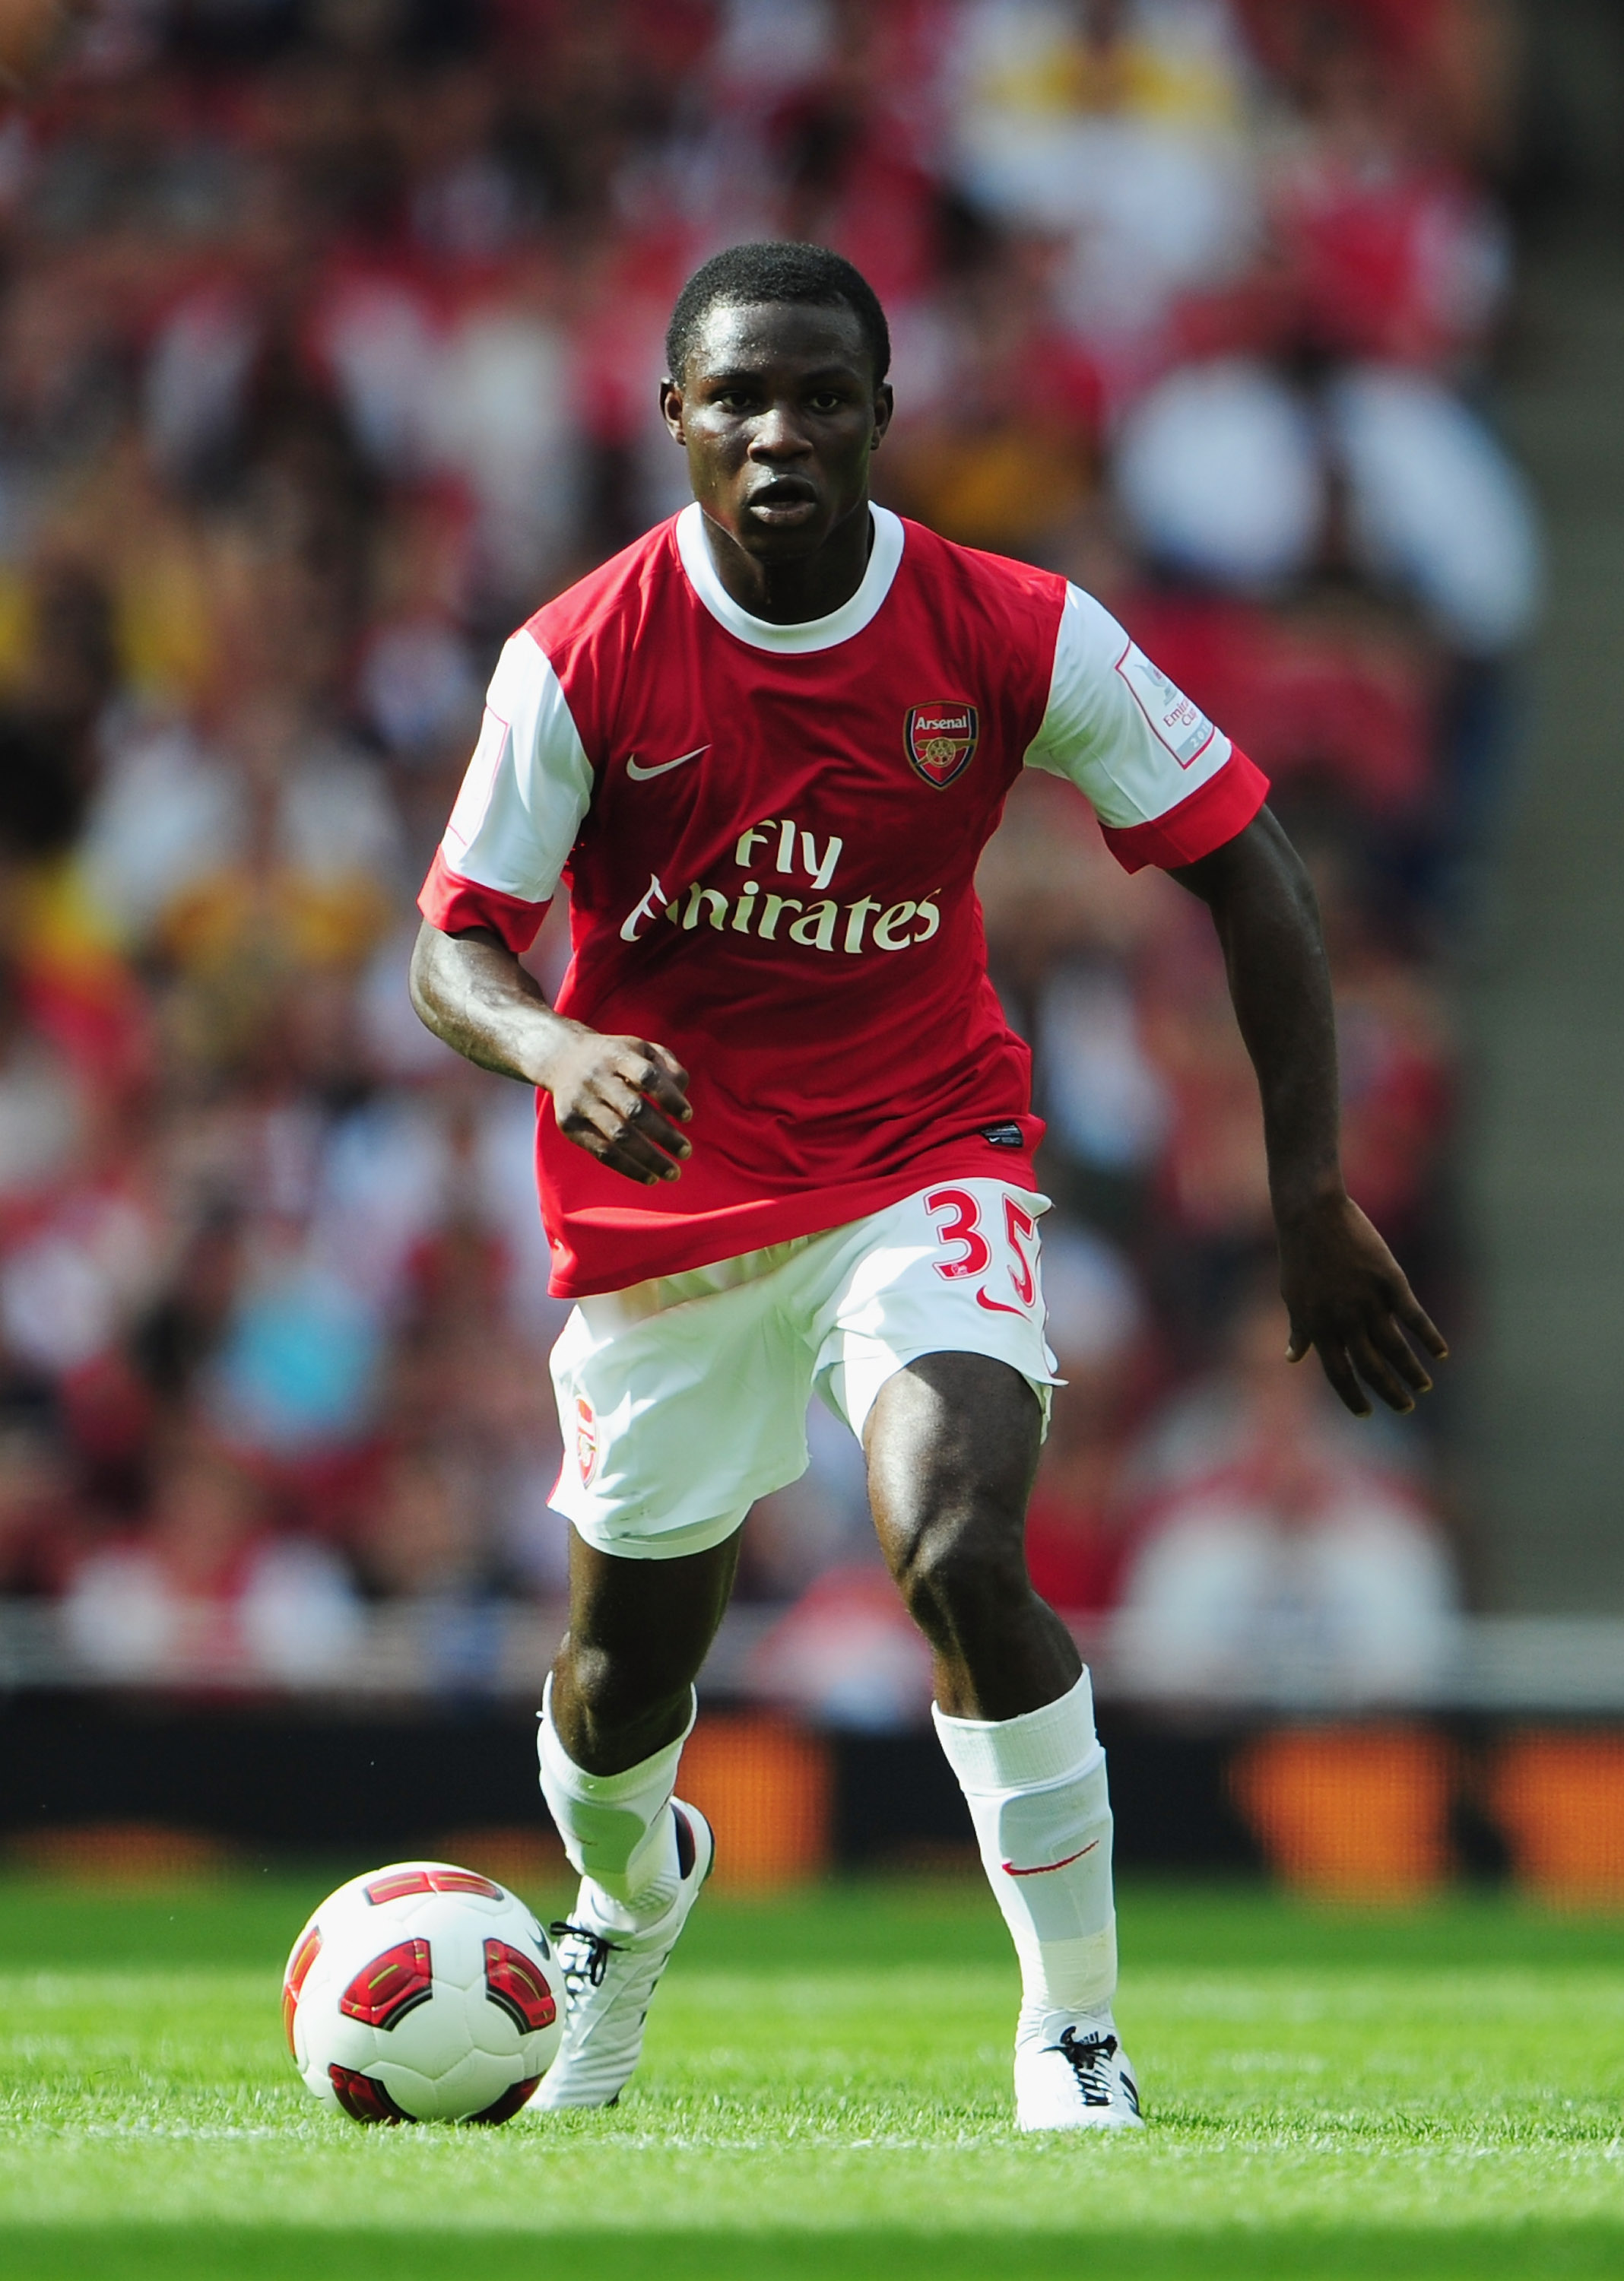 LONDON, ENGLAND - JULY 31:  Emmanuel Frimpong of Arsenal in action during the Emirates Cup match between Arsenal and AC Milan at Emirates Stadium on July 31, 2010 in London, England.  (Photo by Mike Hewitt/Getty Images)